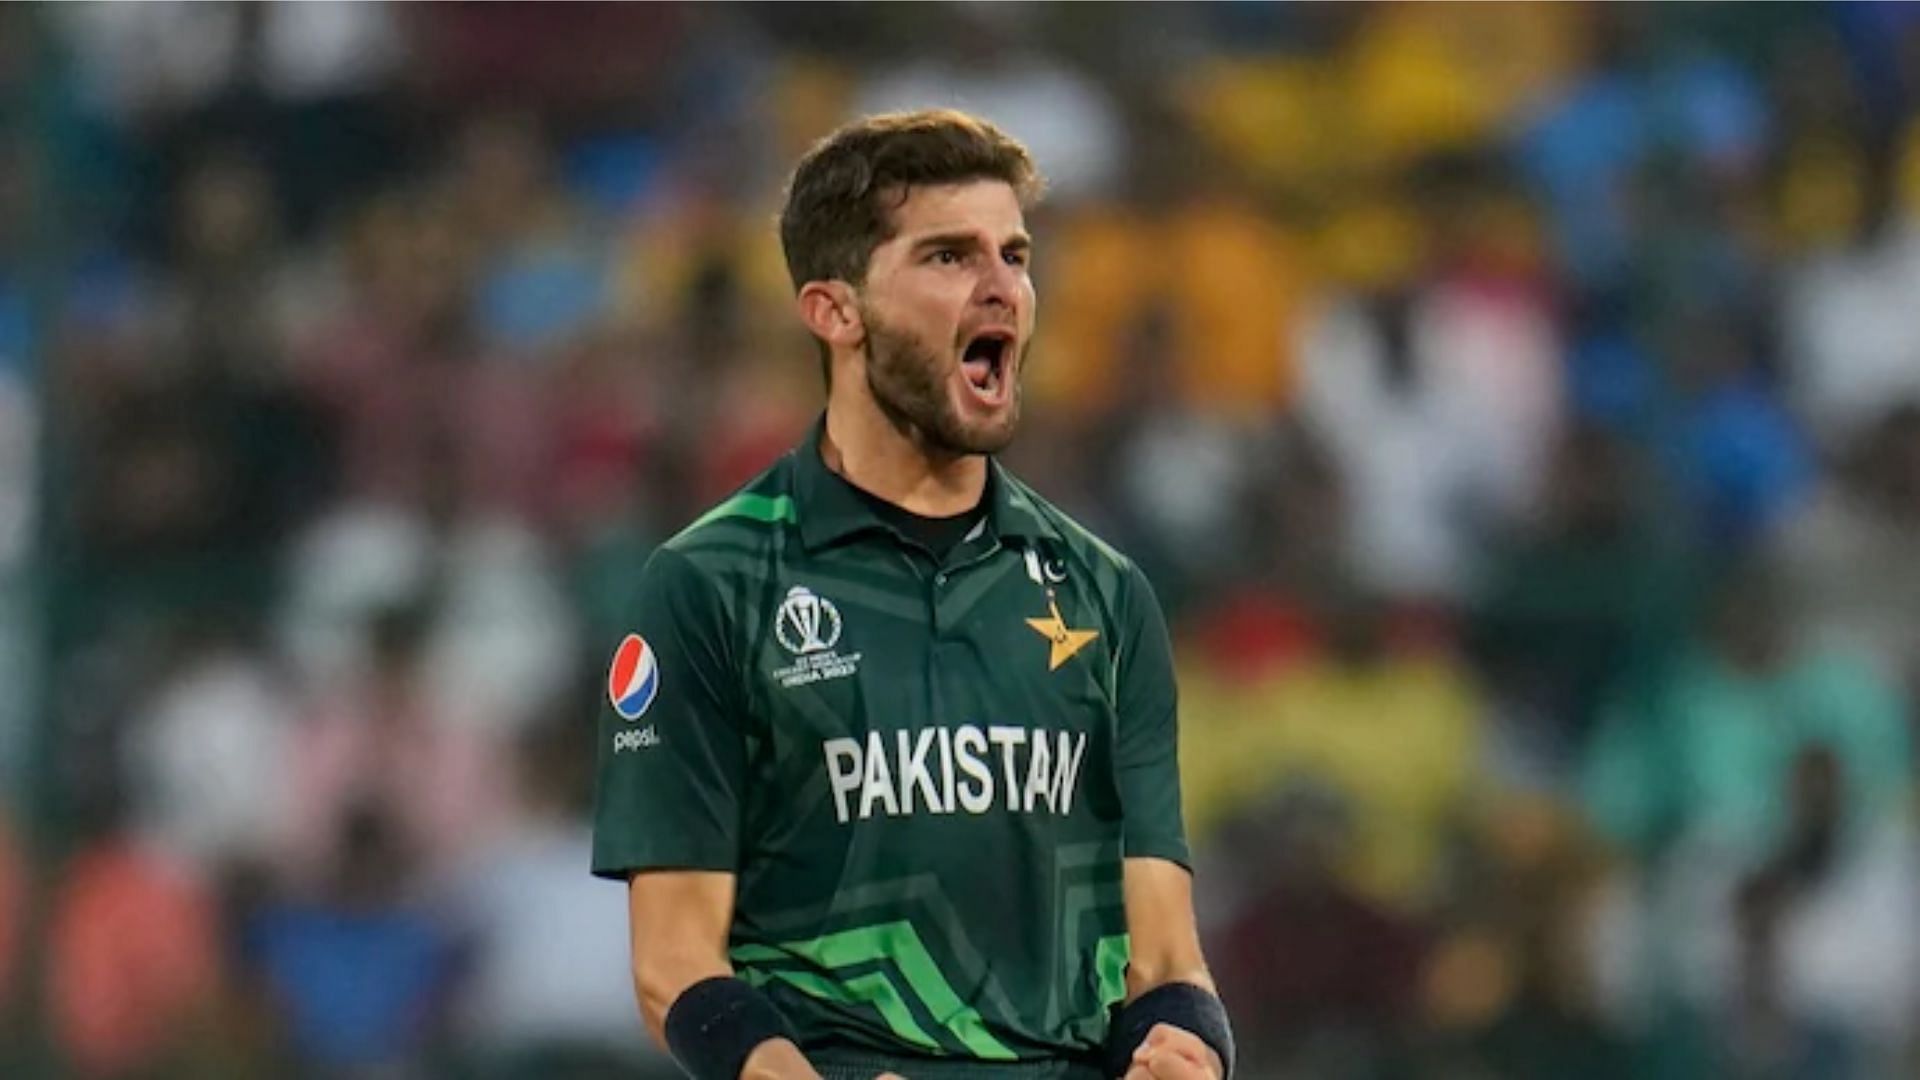 Can Shaheen Afridi continue his terrific run of form?